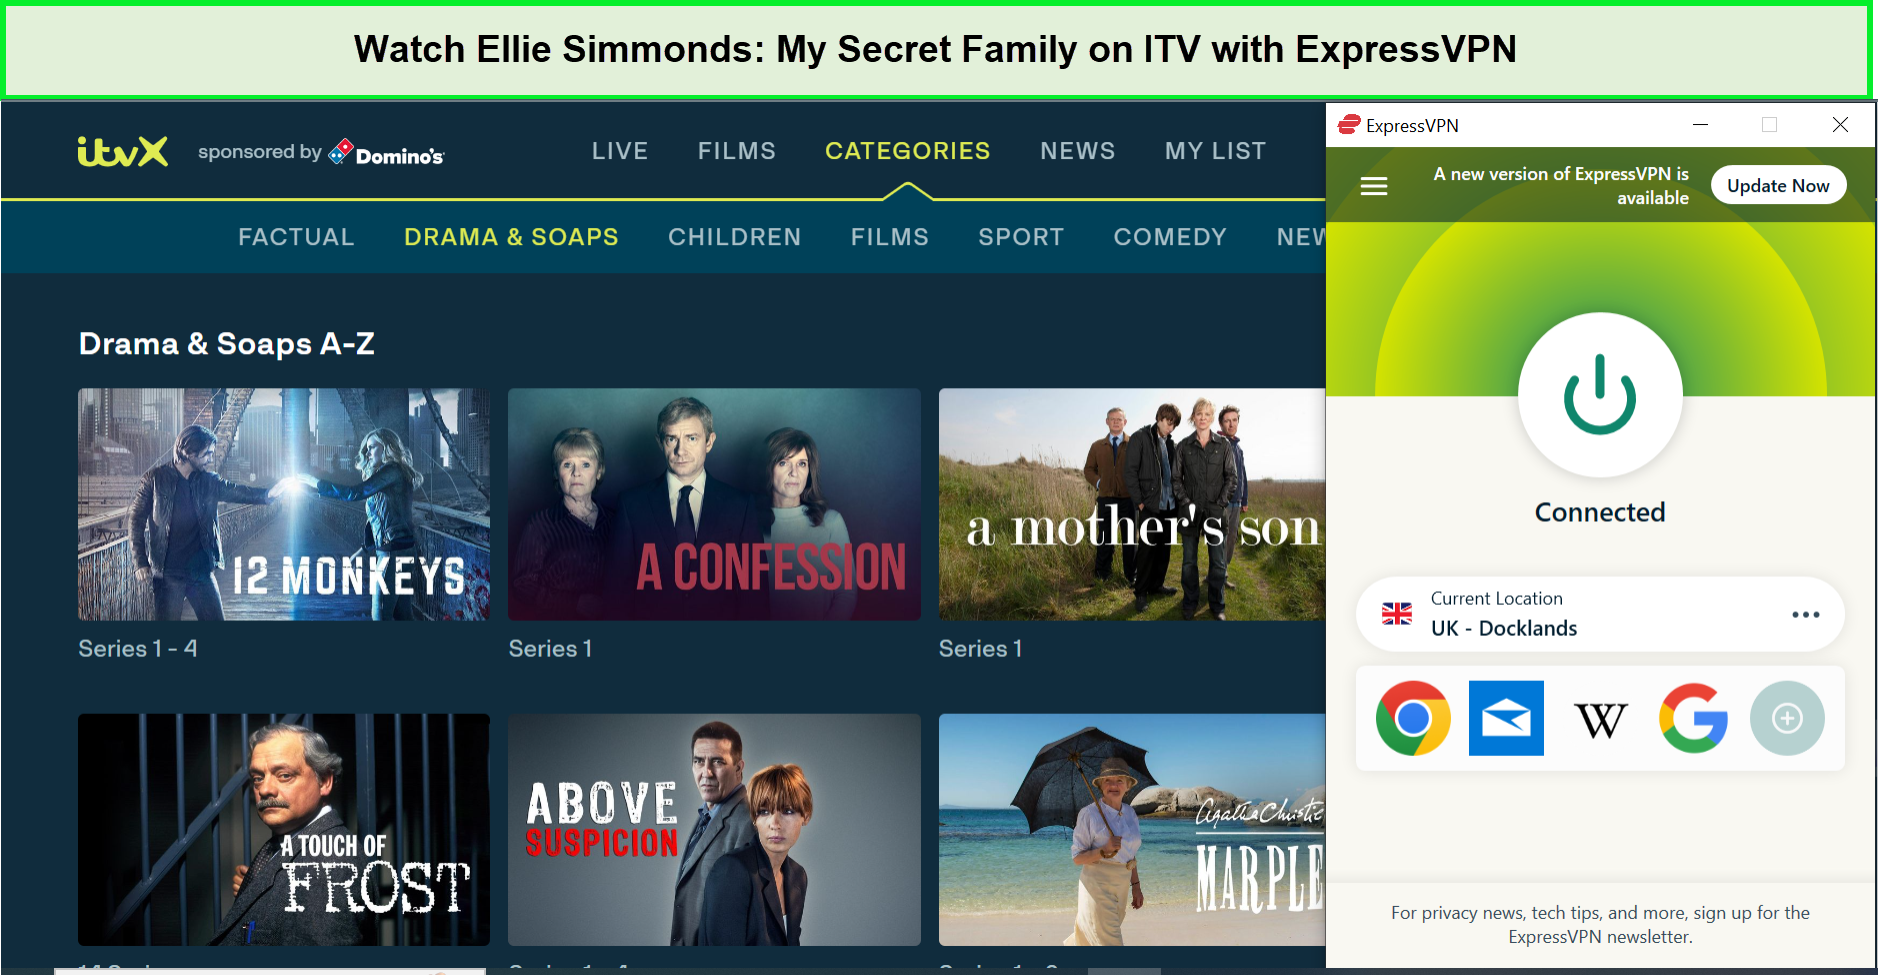 Watch-Ellie-Simmonds-My-Secret-Family-in-South Korea-on-ITV-with-ExpressVPN